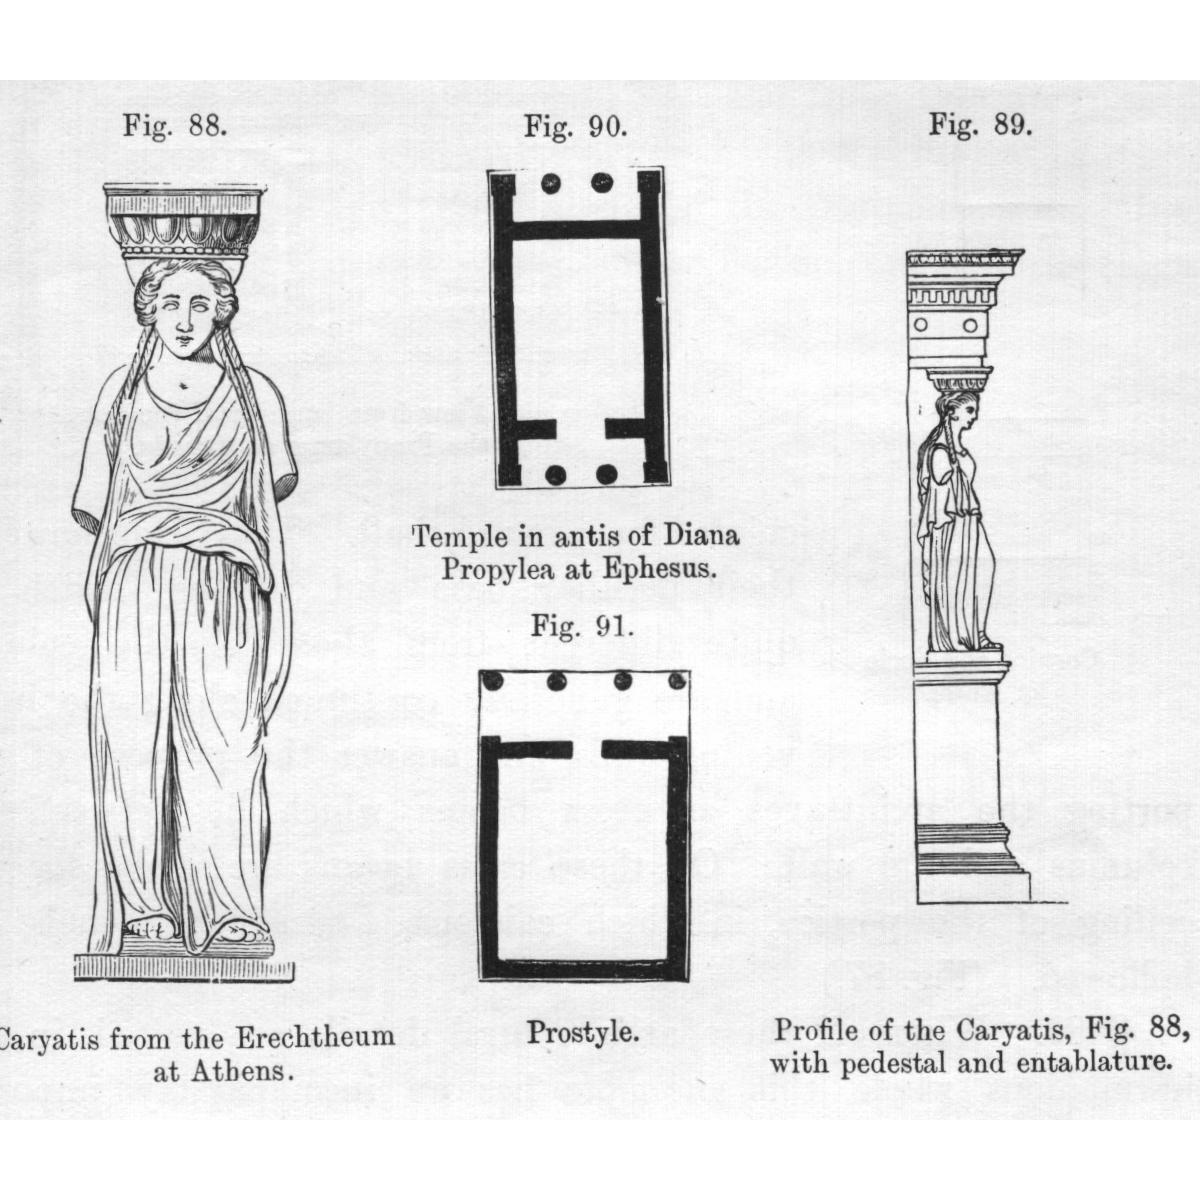 An architectural rendering featuring a caryatid that inspired the four porches of statues on The Field Museum.